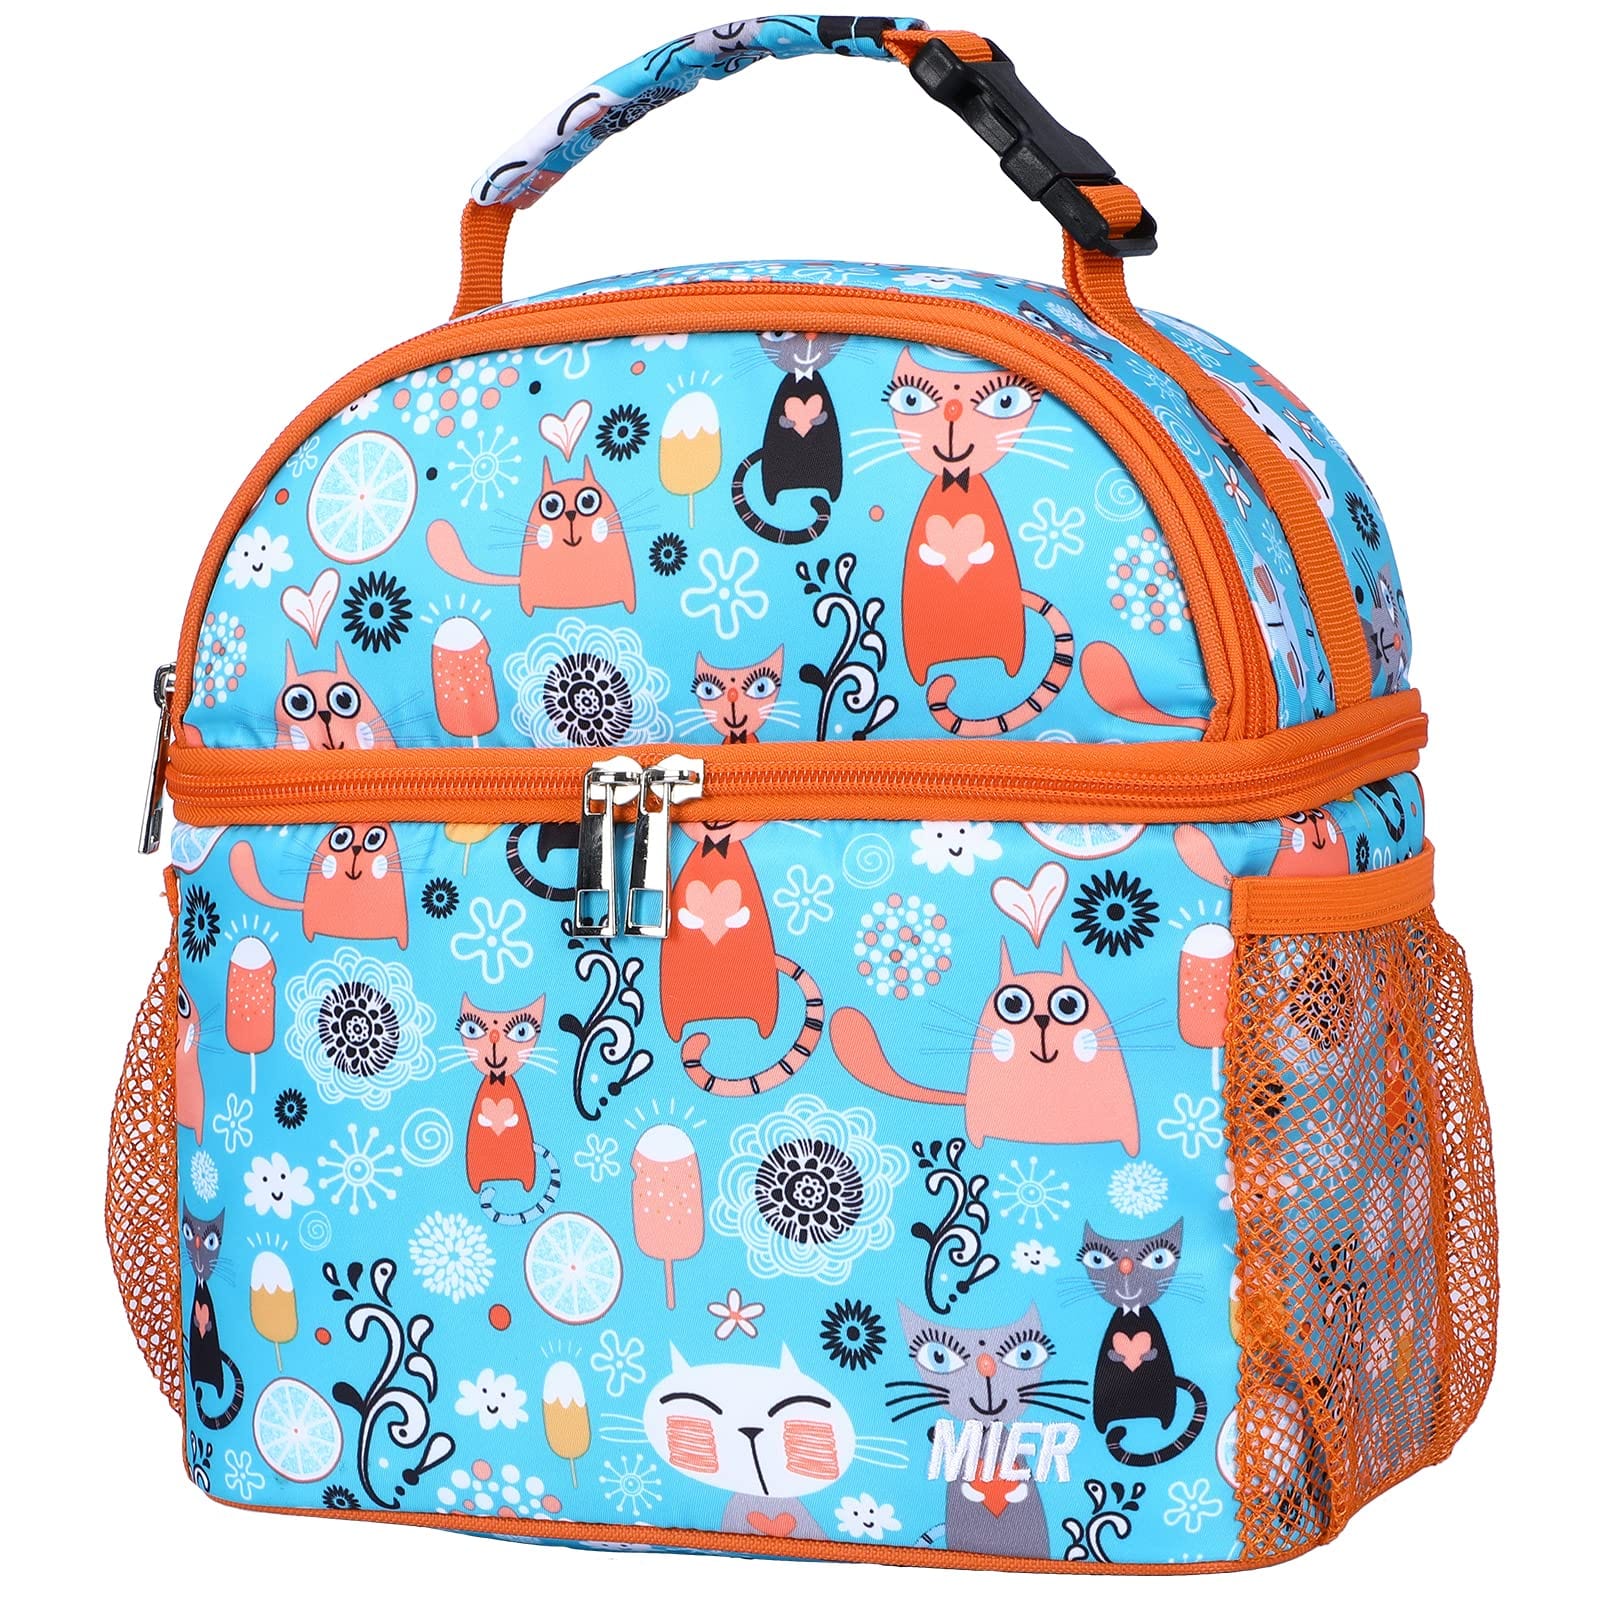 MIER Kids Lunch Bag Insulated Toddlers Lunch Cooler Tote, Blue Orange Cat